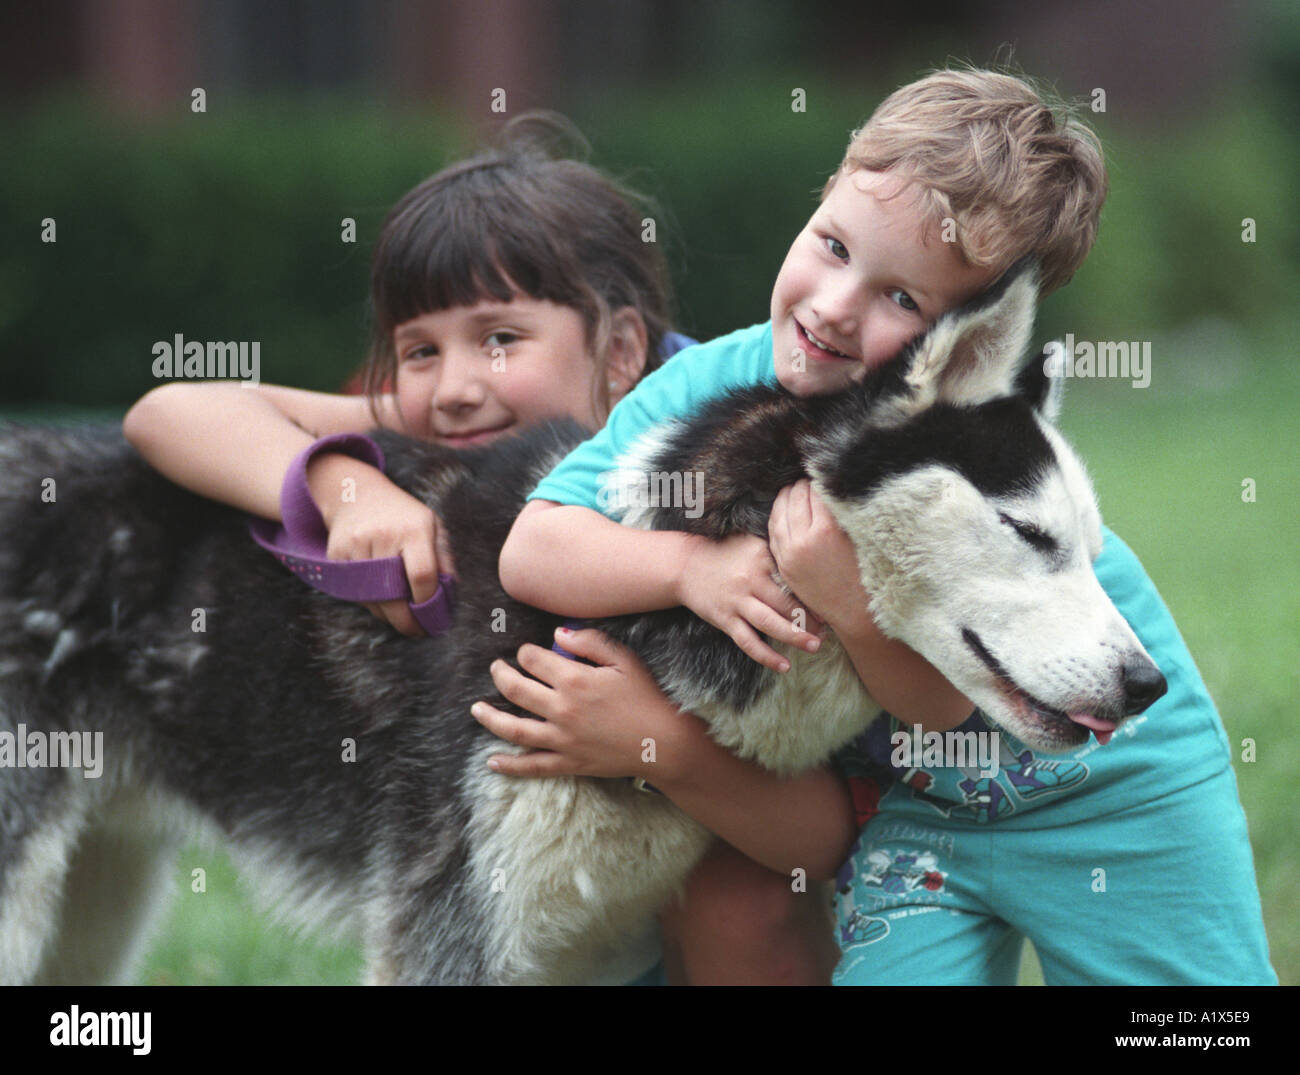 Two small children boy and girl hugging pet dog glee and joy on face  playing and family love Stock Photo - Alamy